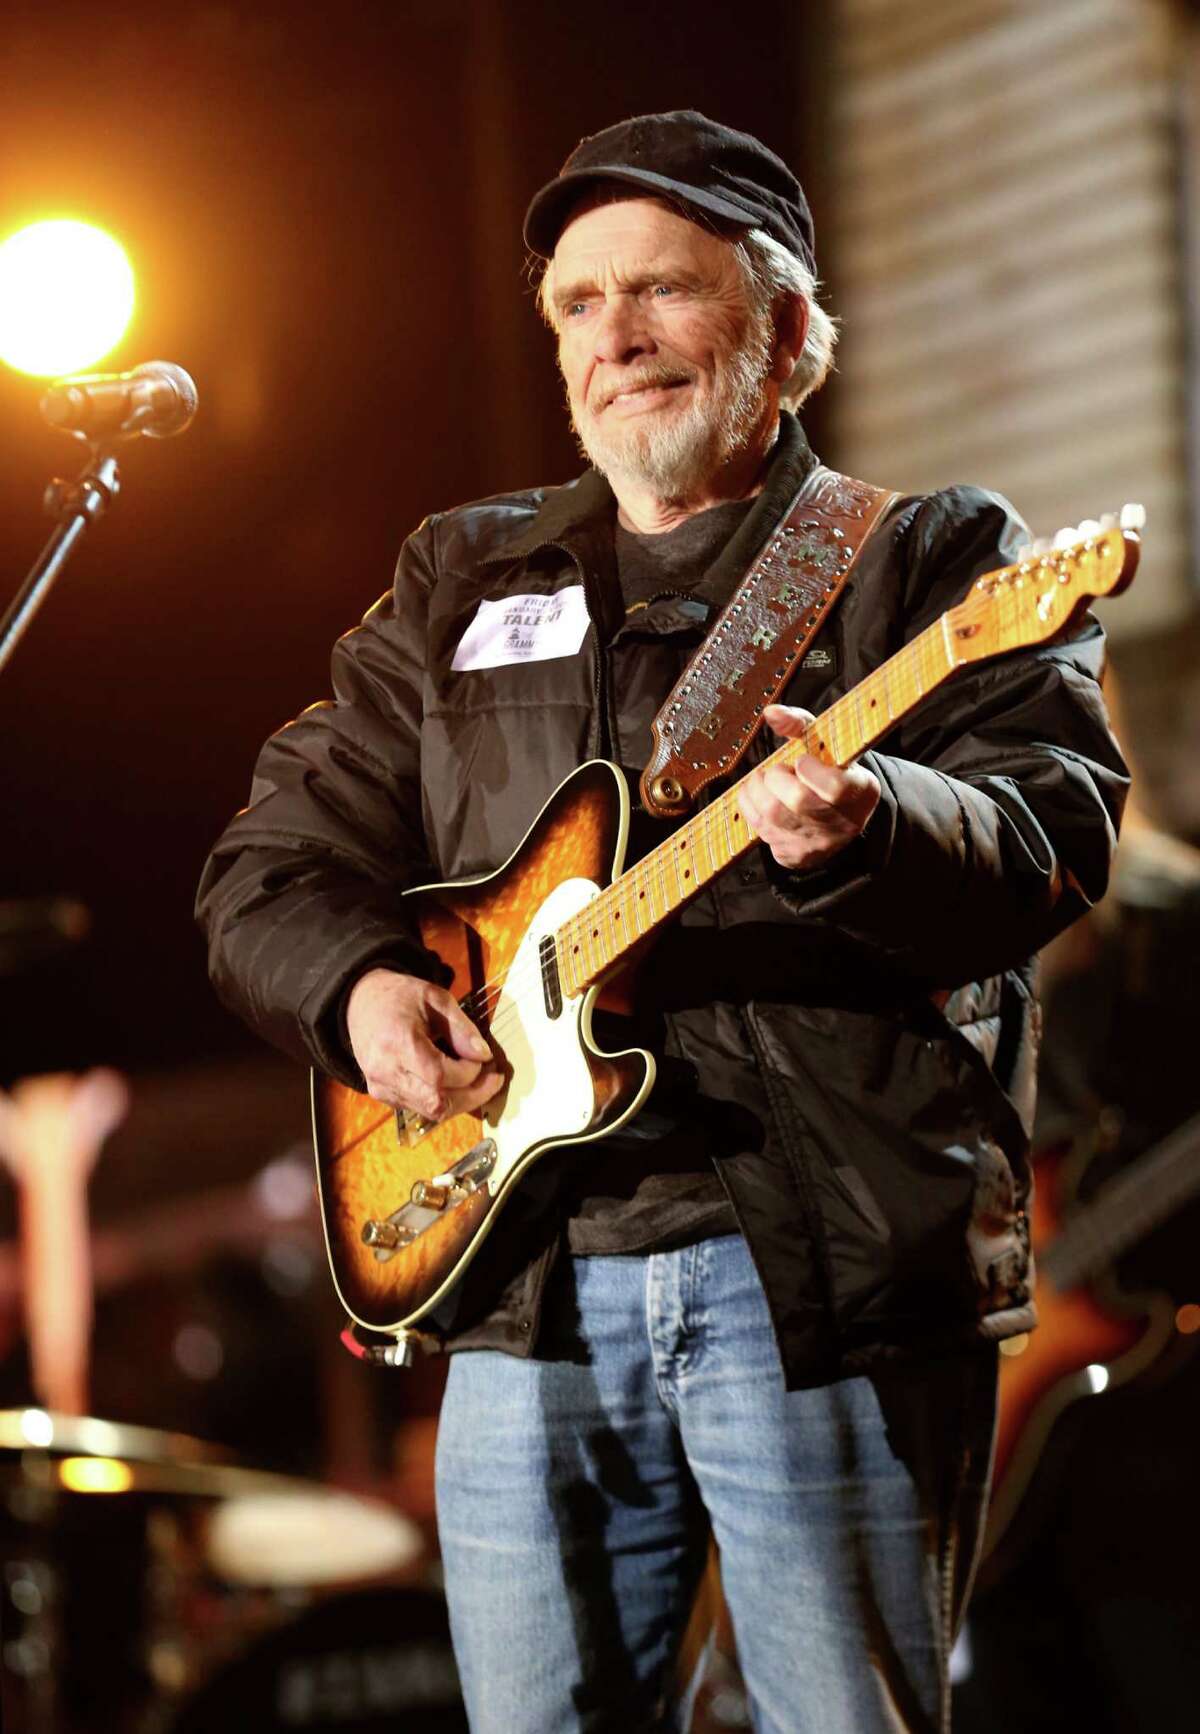 Thanks to Merle Haggard, the Majestic Theatre will be filled with rough-and-tumble songs such as “The Fightin’ Side of Me” and “The Bottle Let Me Down.” His band The Strangers includes his wife, Theresa, and their son, Ben, 21. The Country Music Hall of Fame member, 77, scored 40 No. 1 singles across six decades. Haggard, an award-winning legend, told the Associated Press about playing at Ryman Auditorium in Nashville: “You've got all those people out there that call you a legend. You kinda gotta prove it.” 8 p.m. Monday, Majestic Theatre, 224 E. Houston St. $35-$60 box office, ticketmaster.com. 210-226-3333 or majesticempire.com.-- John Goodspeed